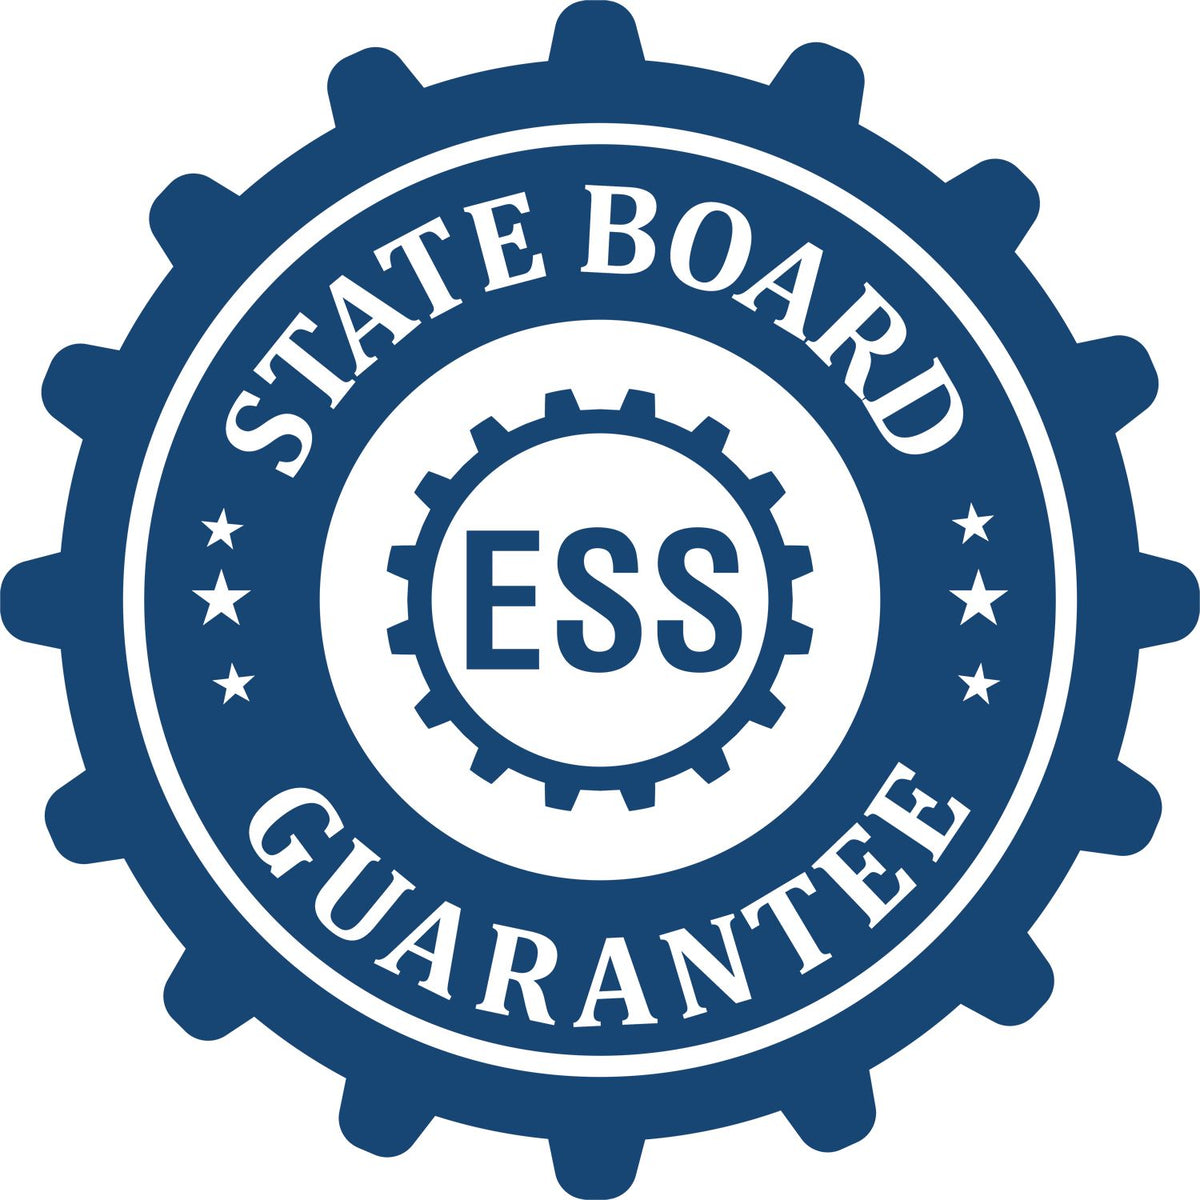 An emblem in a gear shape illustrating a state board guarantee for the Hybrid Virginia Geologist Seal